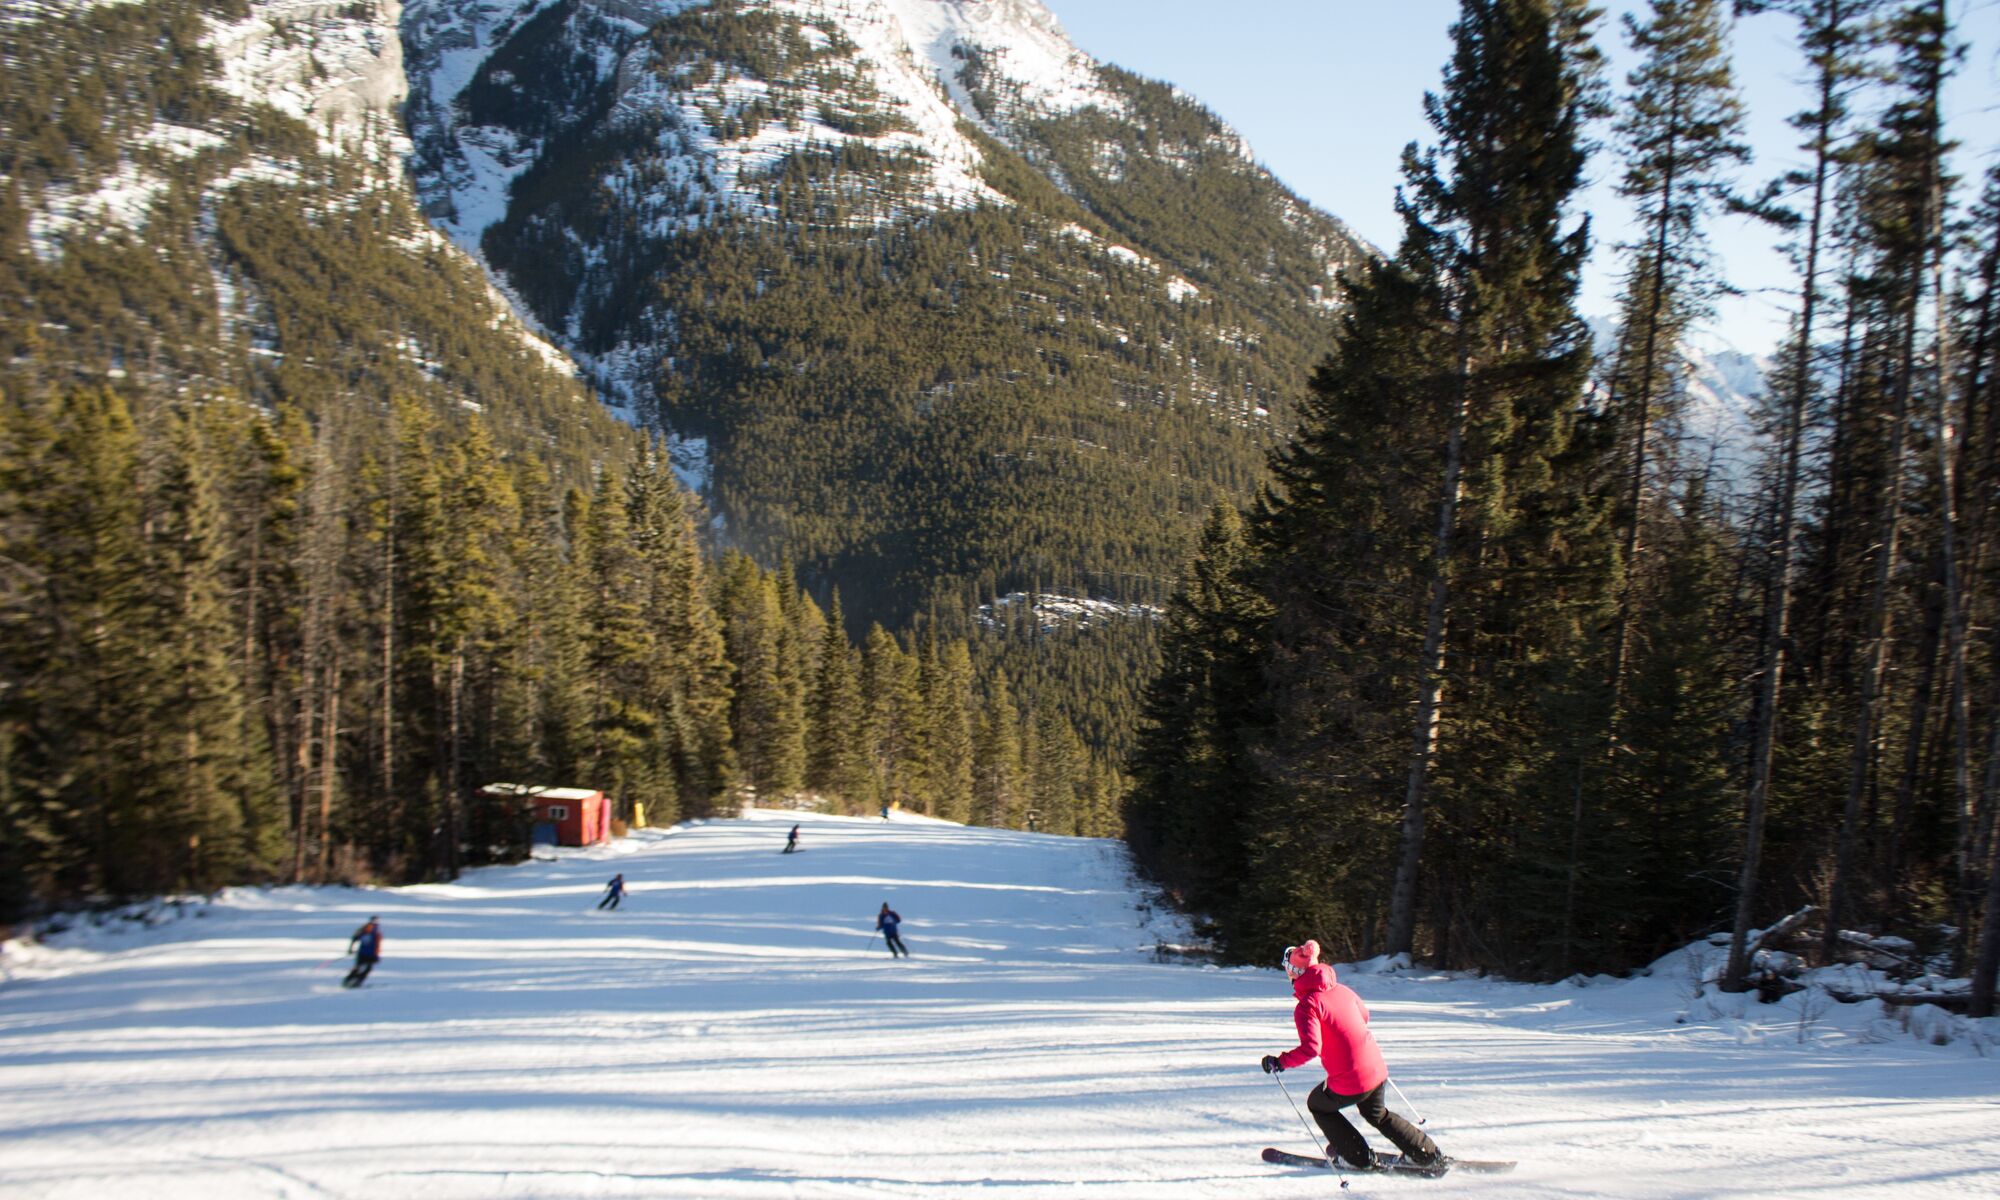 Skiers head down the Crazy Canuck run at Mt. Norquay Ski Resort in Banff National Park.